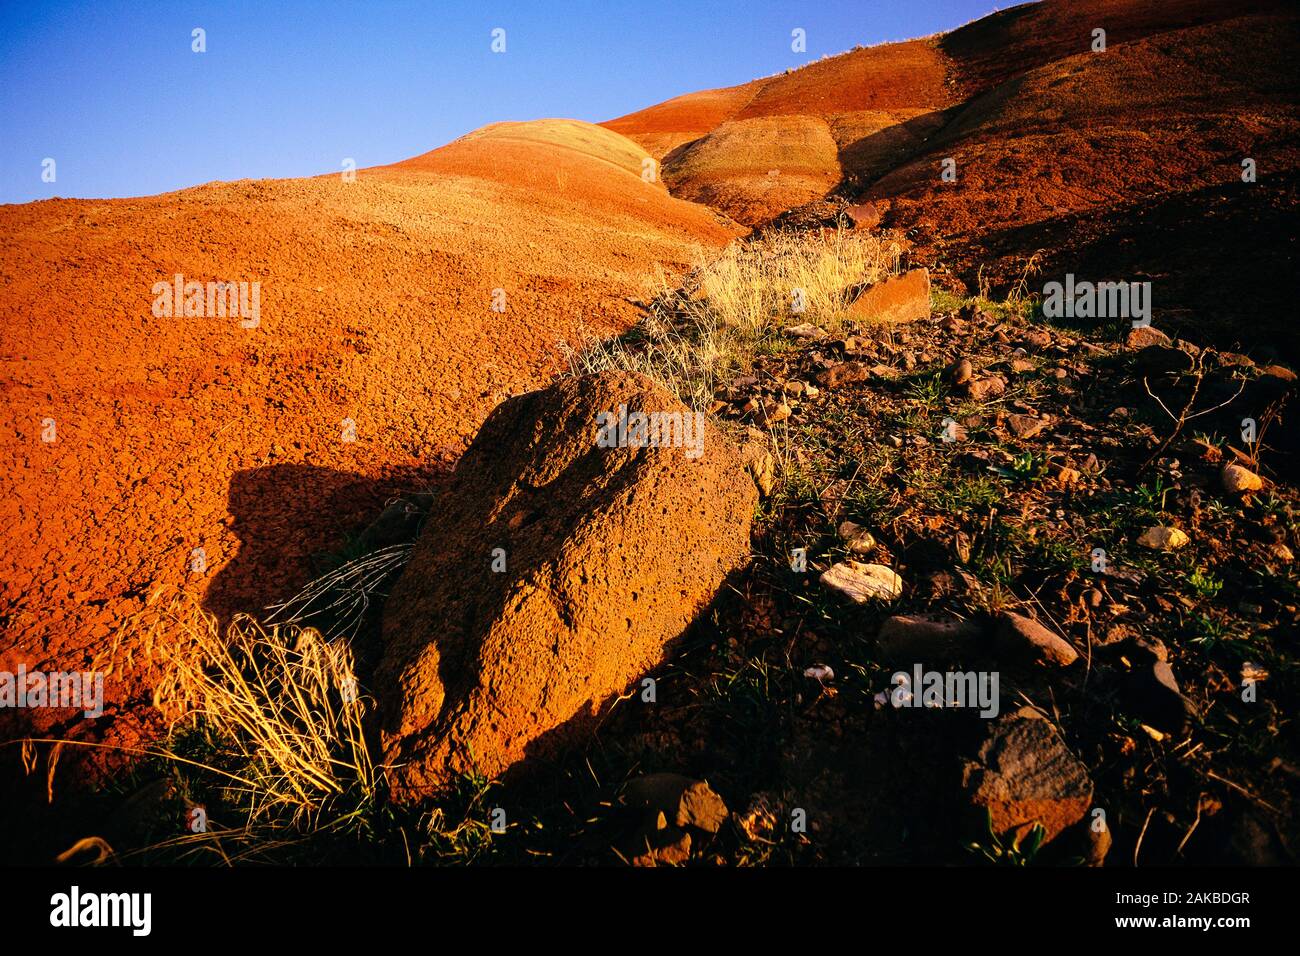 Landscape with rock formations in desert, John Day Fossil Beds National Park, Oregon, USA Stock Photo